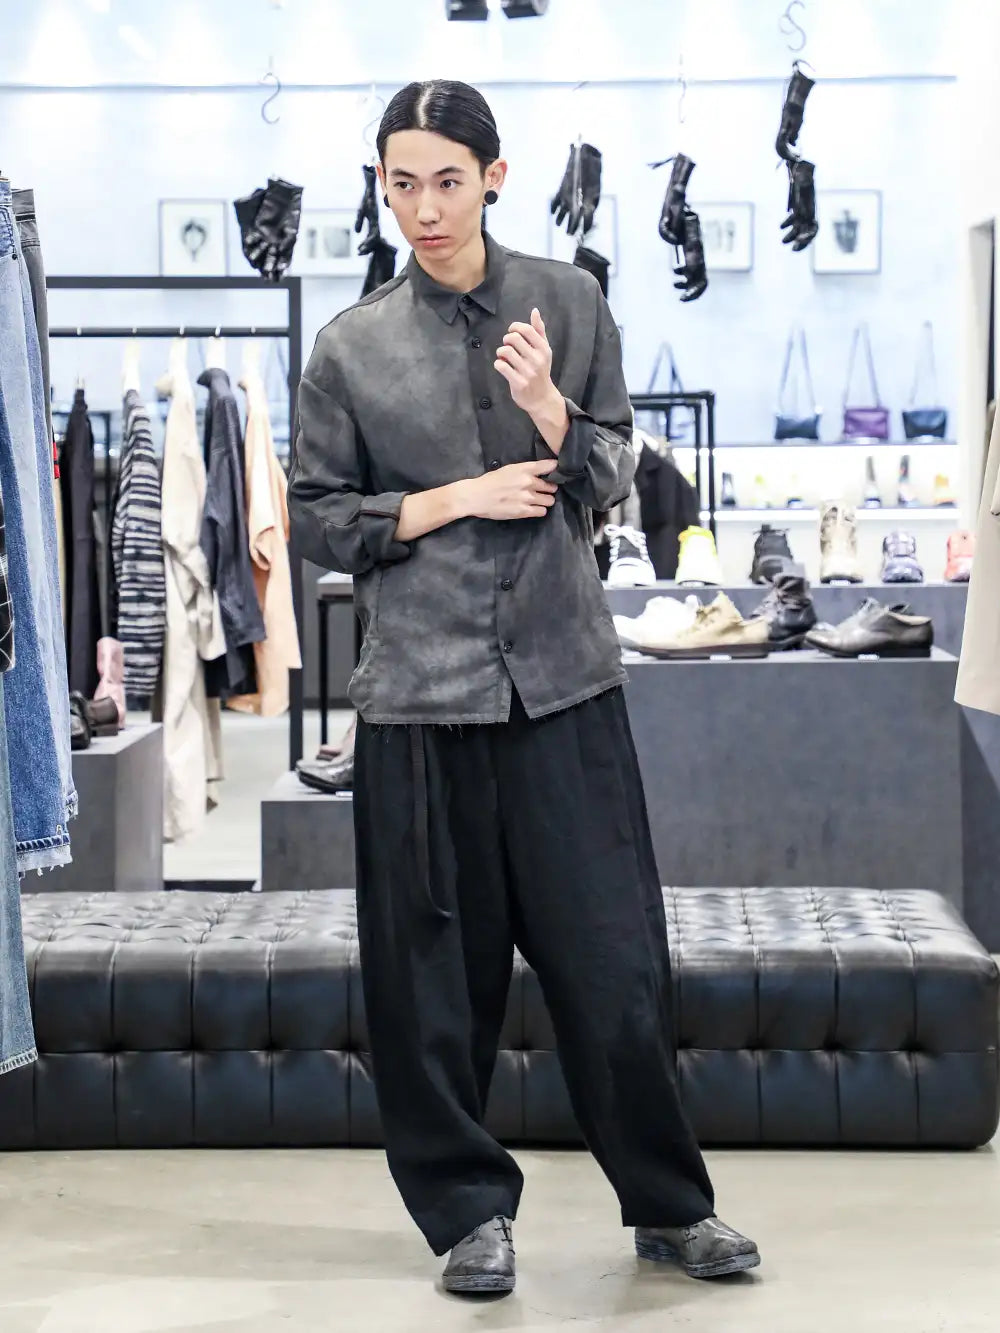 DEVOA Forme D'expression 24SS Styling - Detailed considerations for creating an atmosphere in the design - JKI-SVLR Jacket High Twist Viscose UP033 / 006B 2 Tucked Wide Leg Pants FWI-GDCT-Fade-Gray incarnation x DEVOA Shoe Horse Leather Garment Dye 1-002